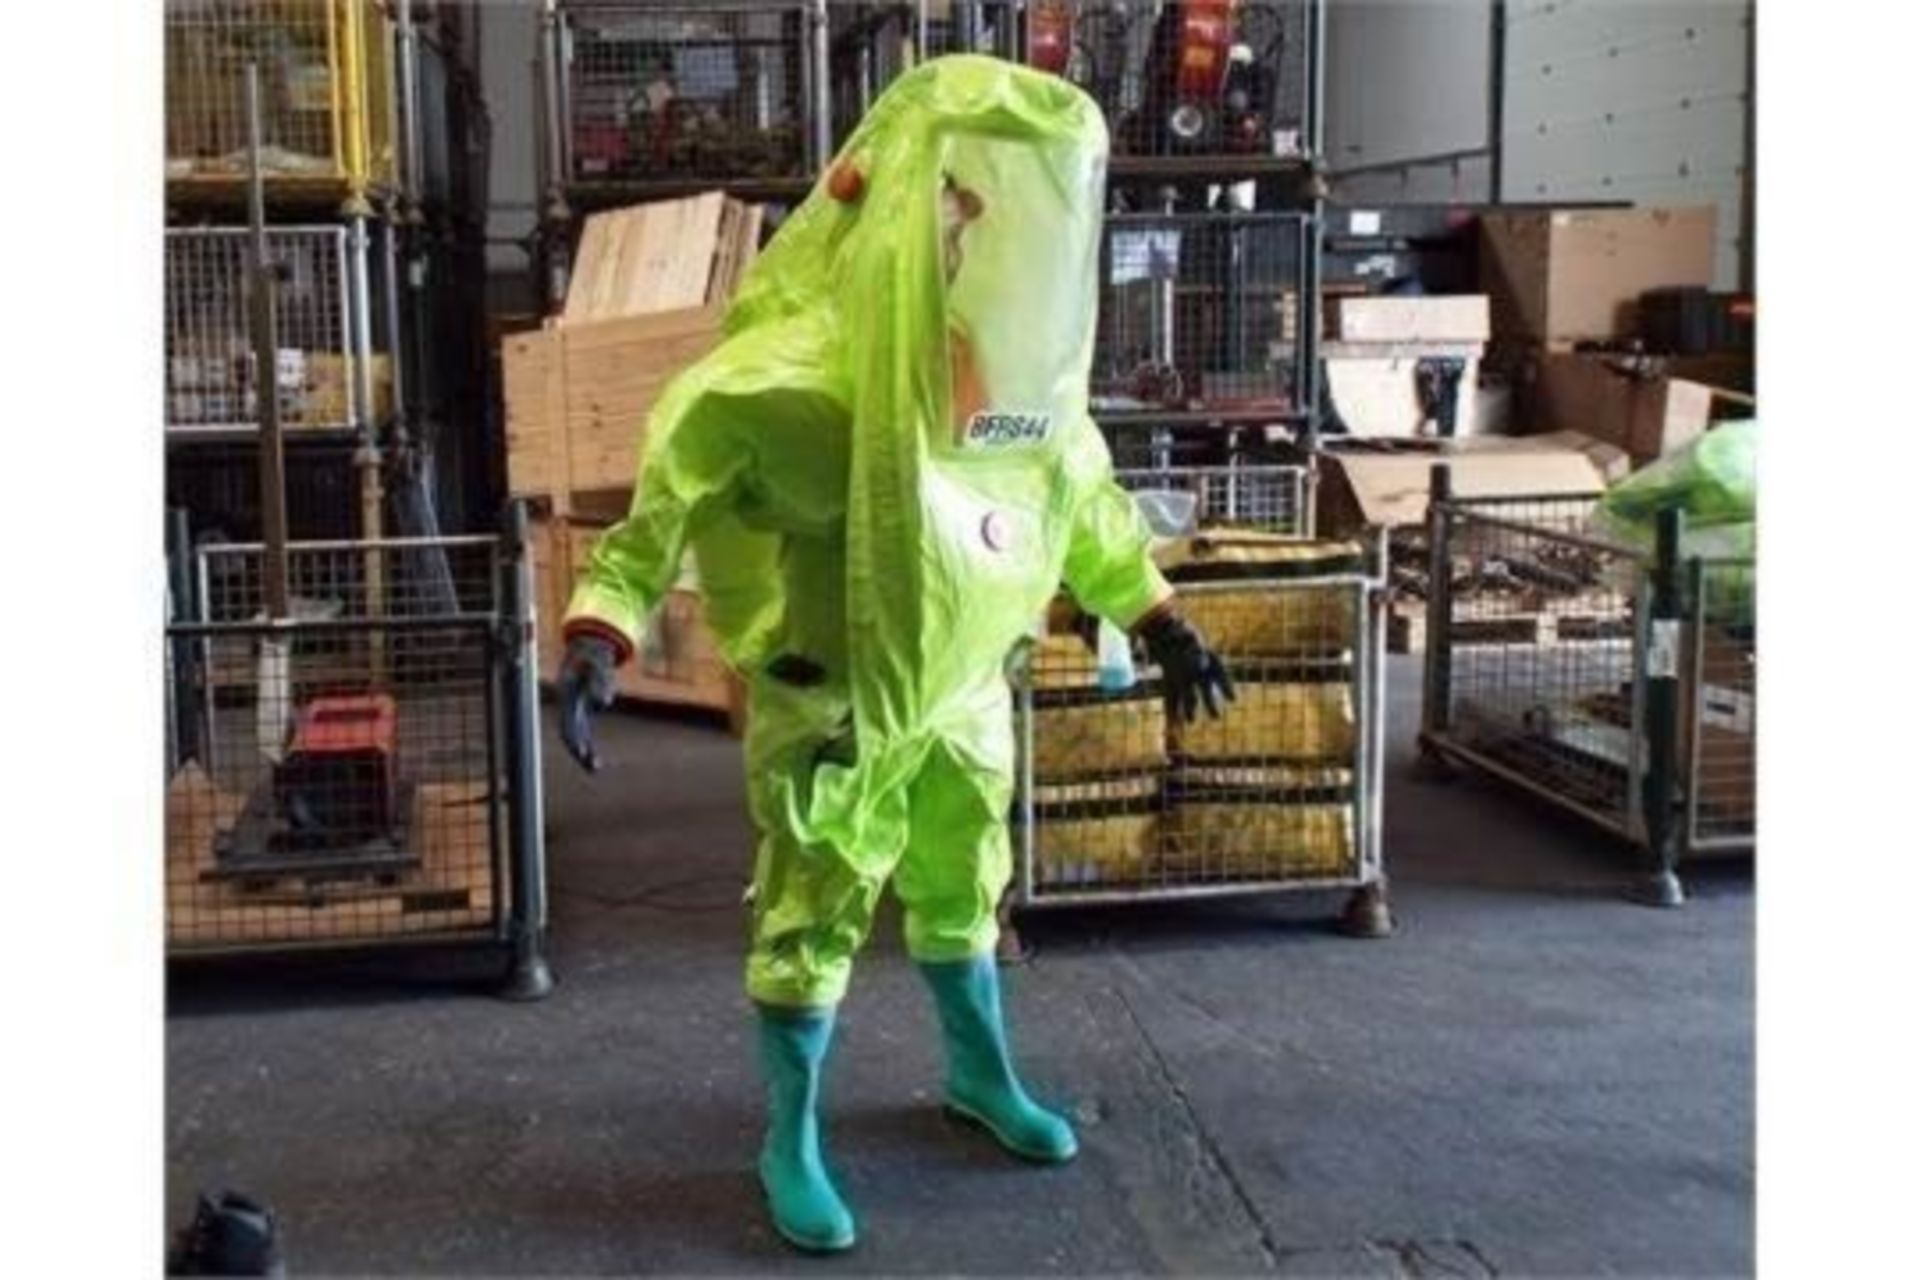 10 x Respirex Tychem TK Gas-Tight Hazmat Suit Type 1A with Attached Boots and Gloves. - Image 3 of 10